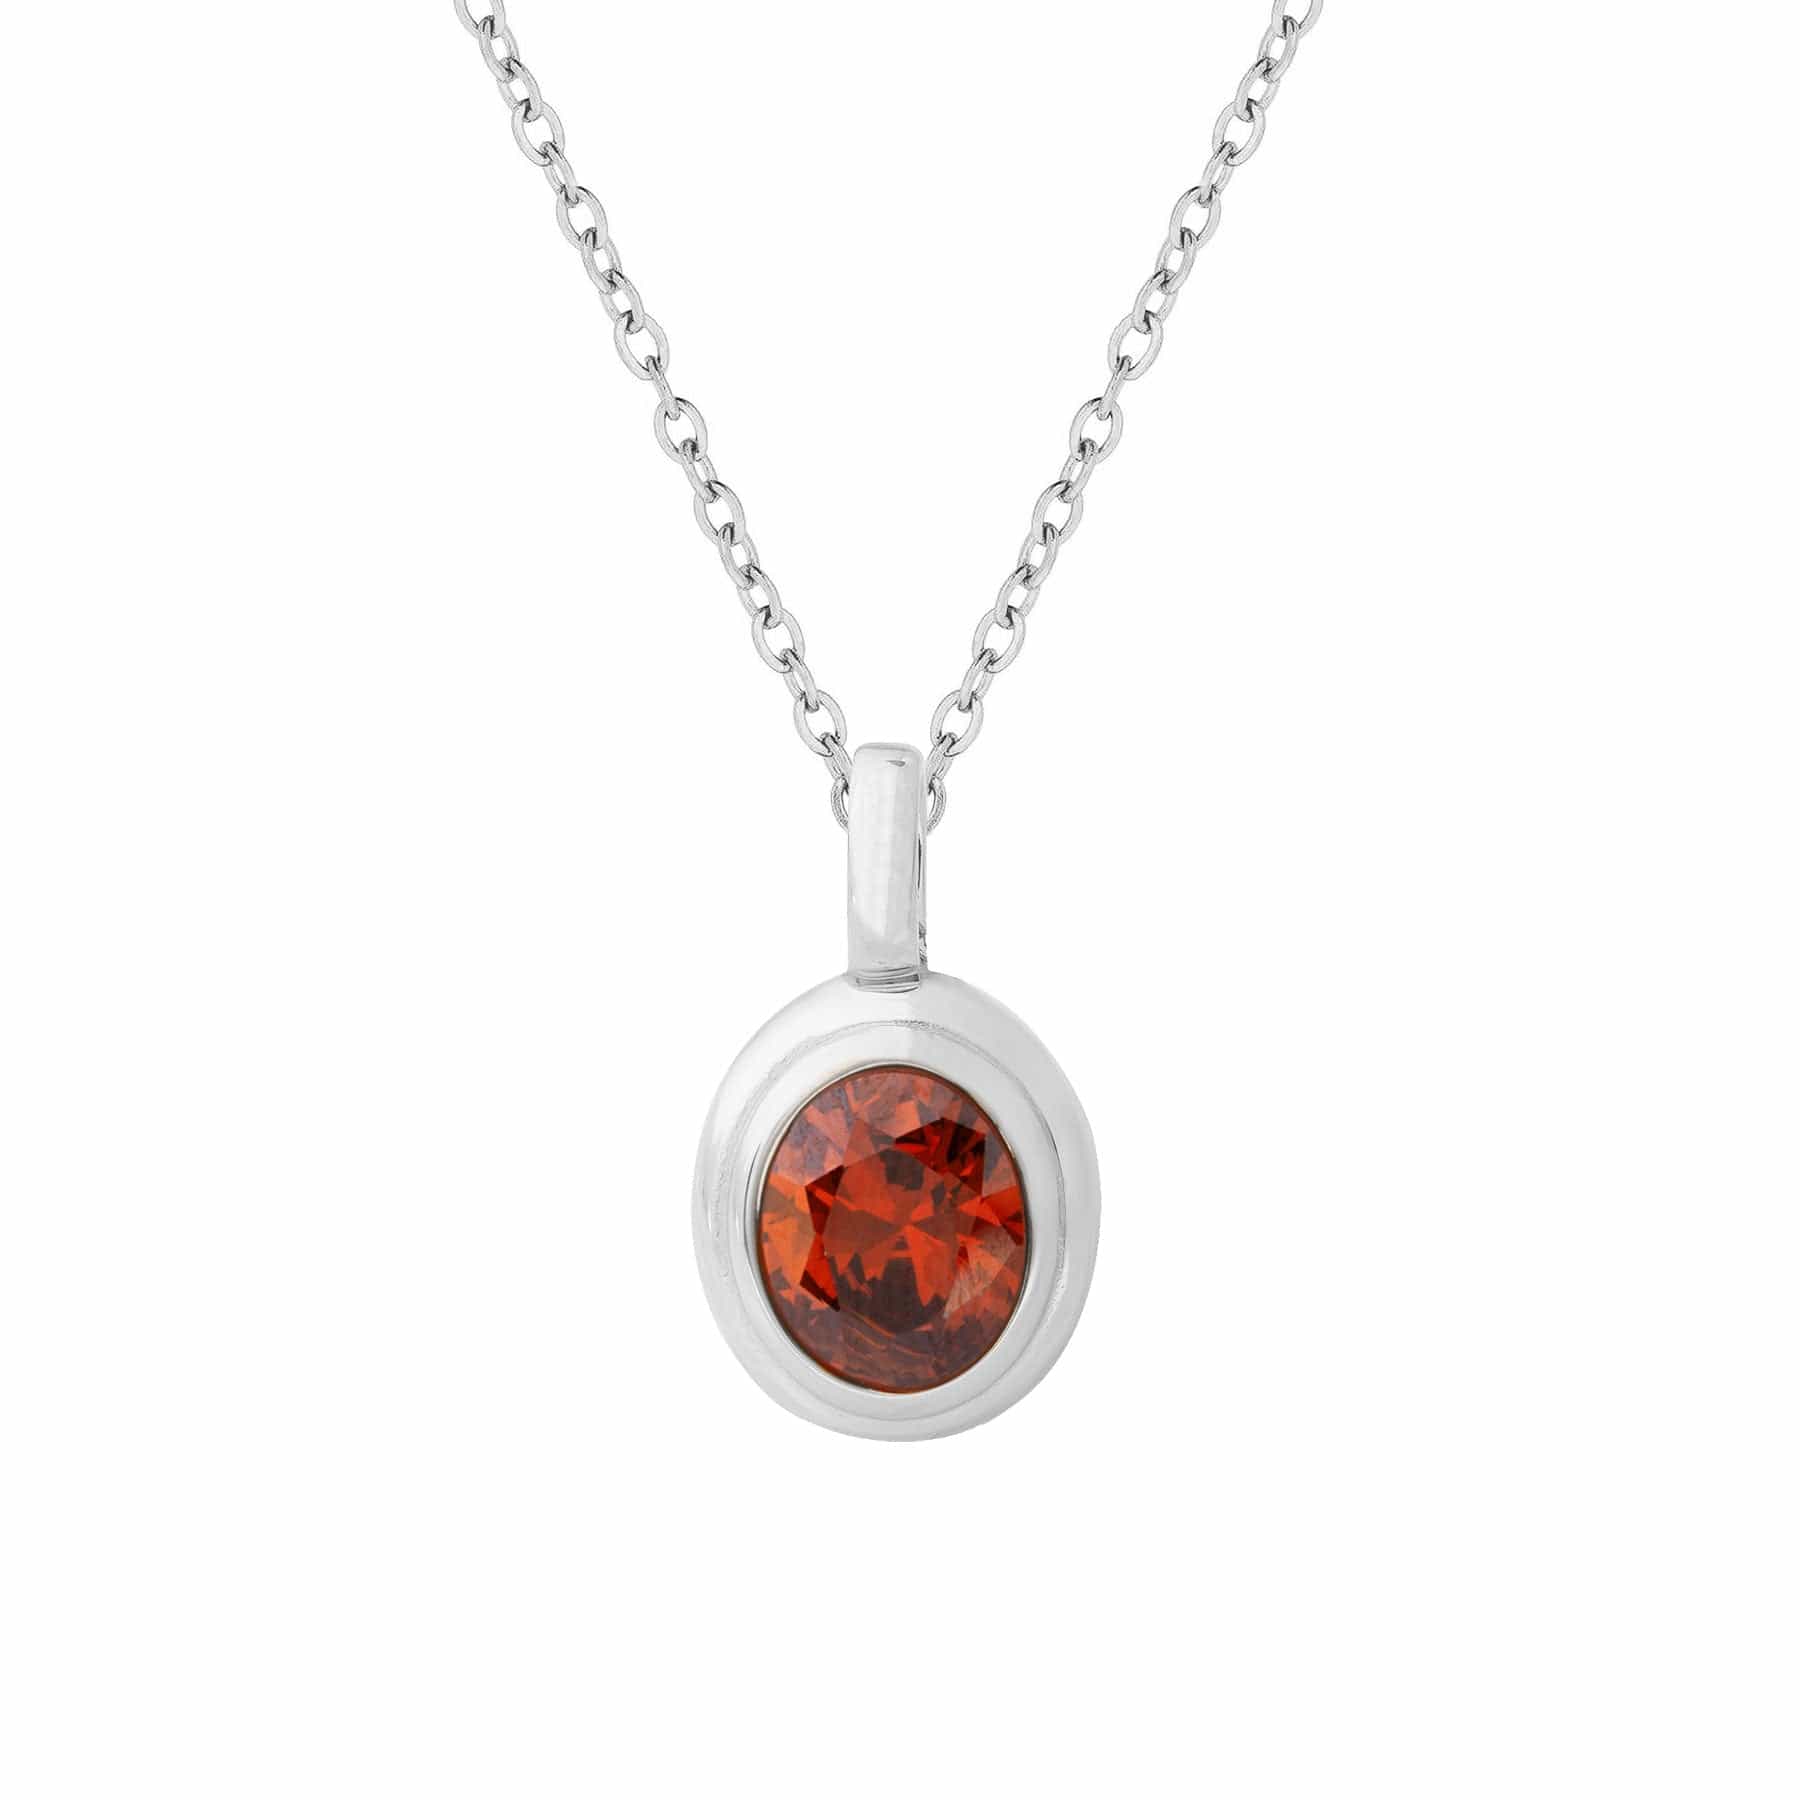 BohoMoon Stainless Steel Sawyer Necklace Silver / Red